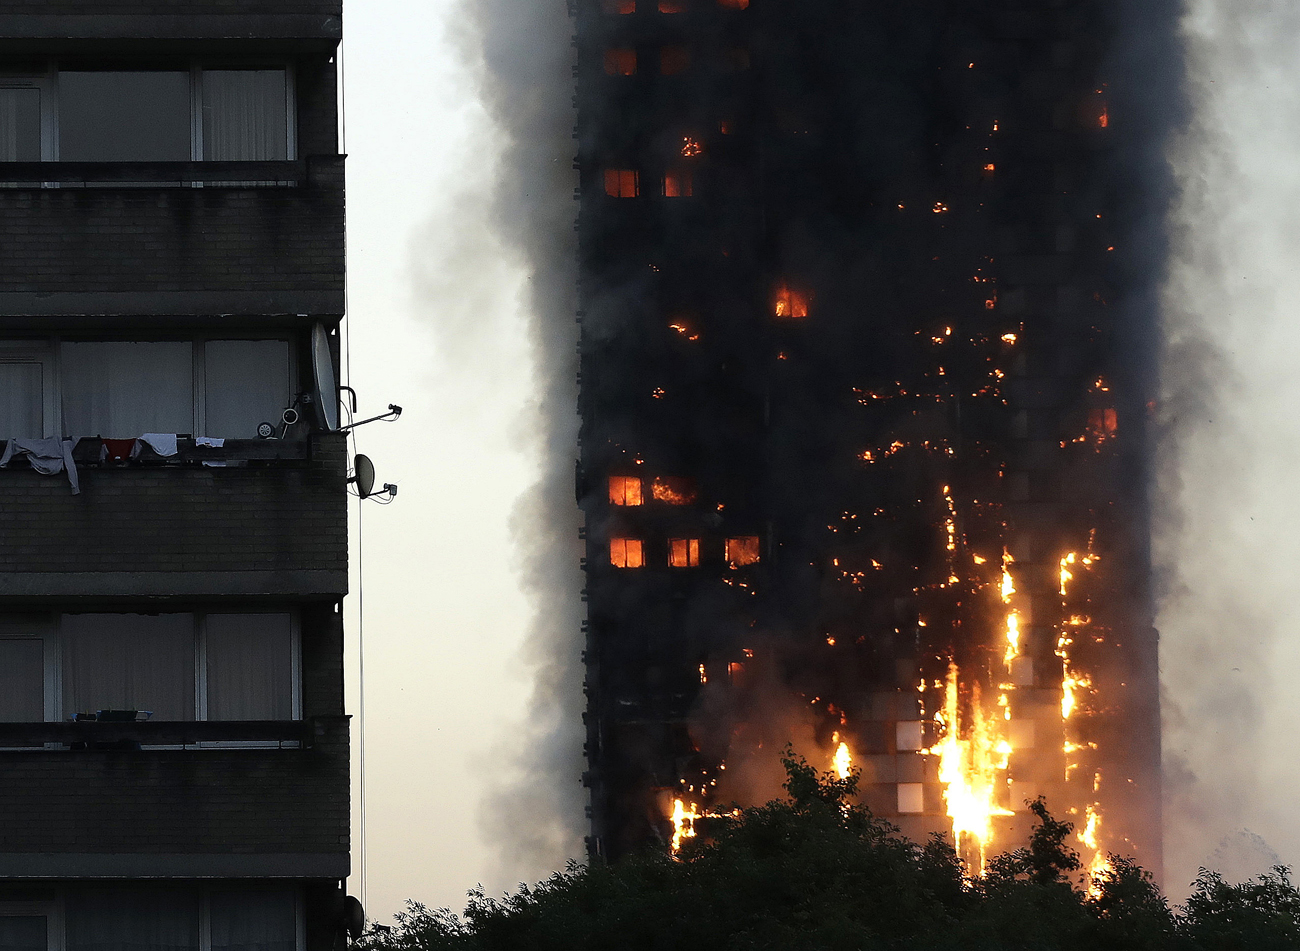 Smoke and flames rise from a building on fire in London, June 14, 2017. [Photo: AP/ Matt Dunham]